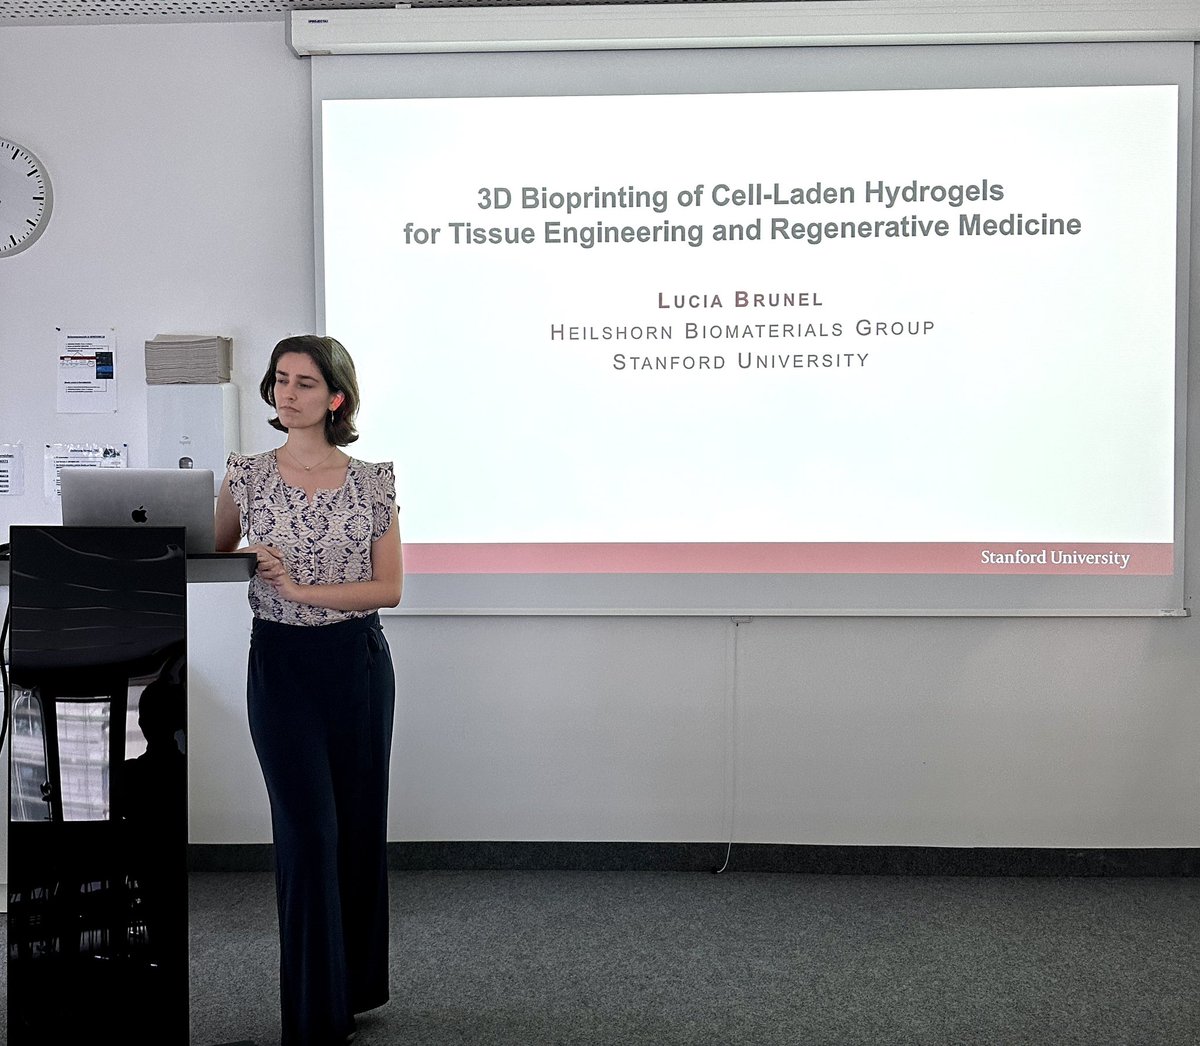 We are excited to have @lucia_g_brunel from @heilshornlab @Stanford University visiting us at @Engel_FB_Lab and giving an interesting talk on her work with @HeilshornSarah Thanks for coming Lucia.